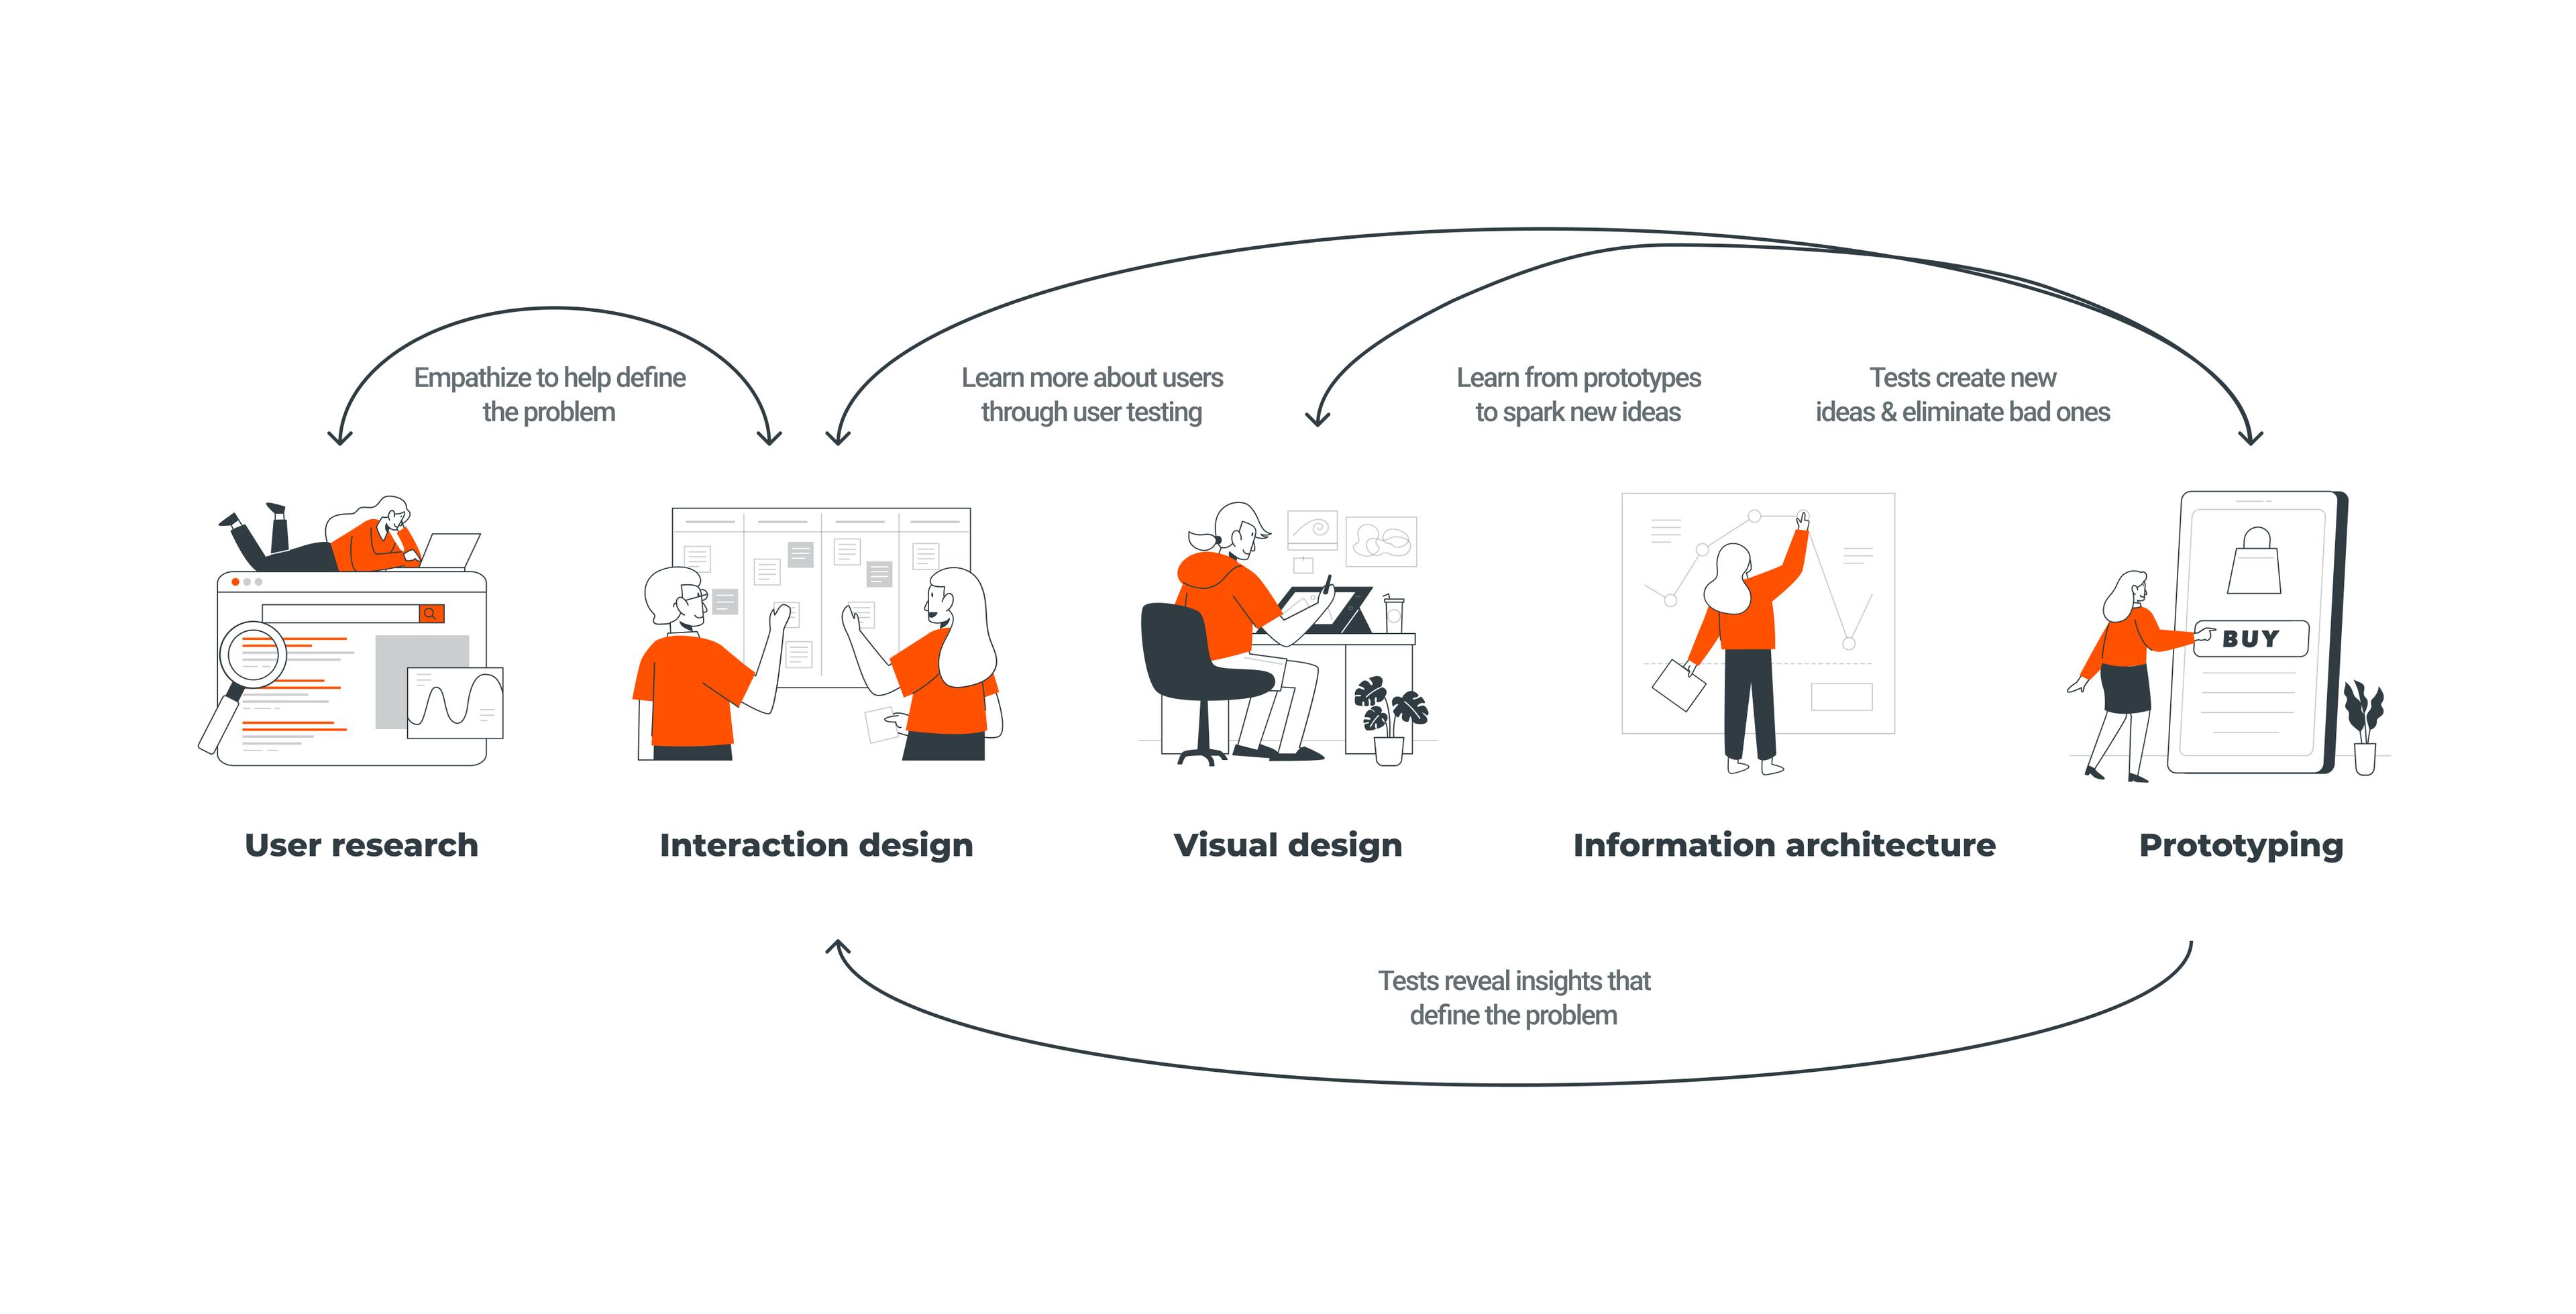 Different UX/UI practices: user research, interaction design, visual design, information architecture and prototyping